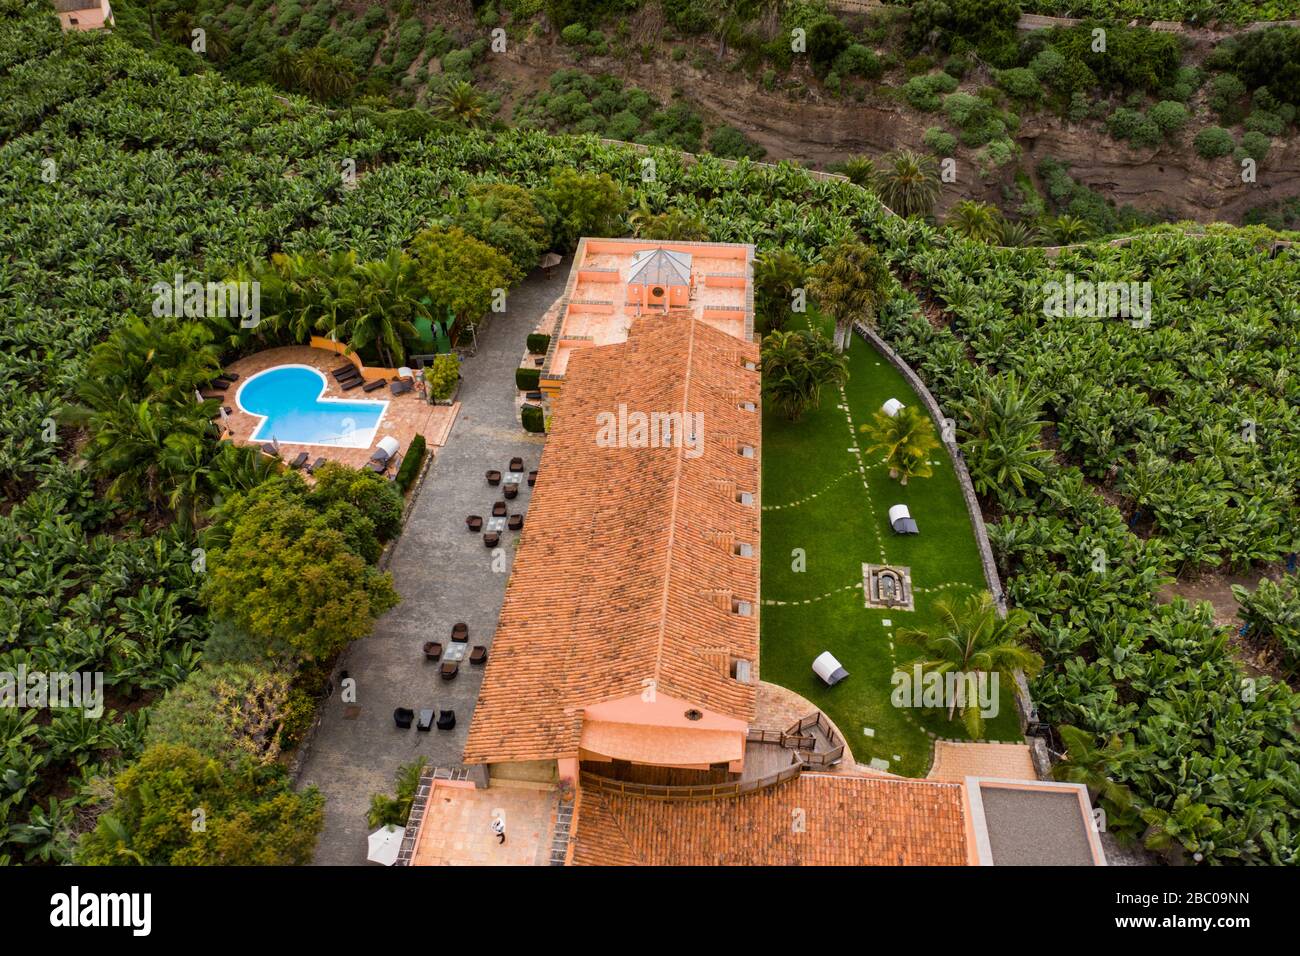 Spain, Canary Islands, Gran Canaria, Arucas - Hotel Rural La Hacienda Del  Buen Suceso. Located right in the middle of 50 hectares of banana trees, th  Stock Photo - Alamy